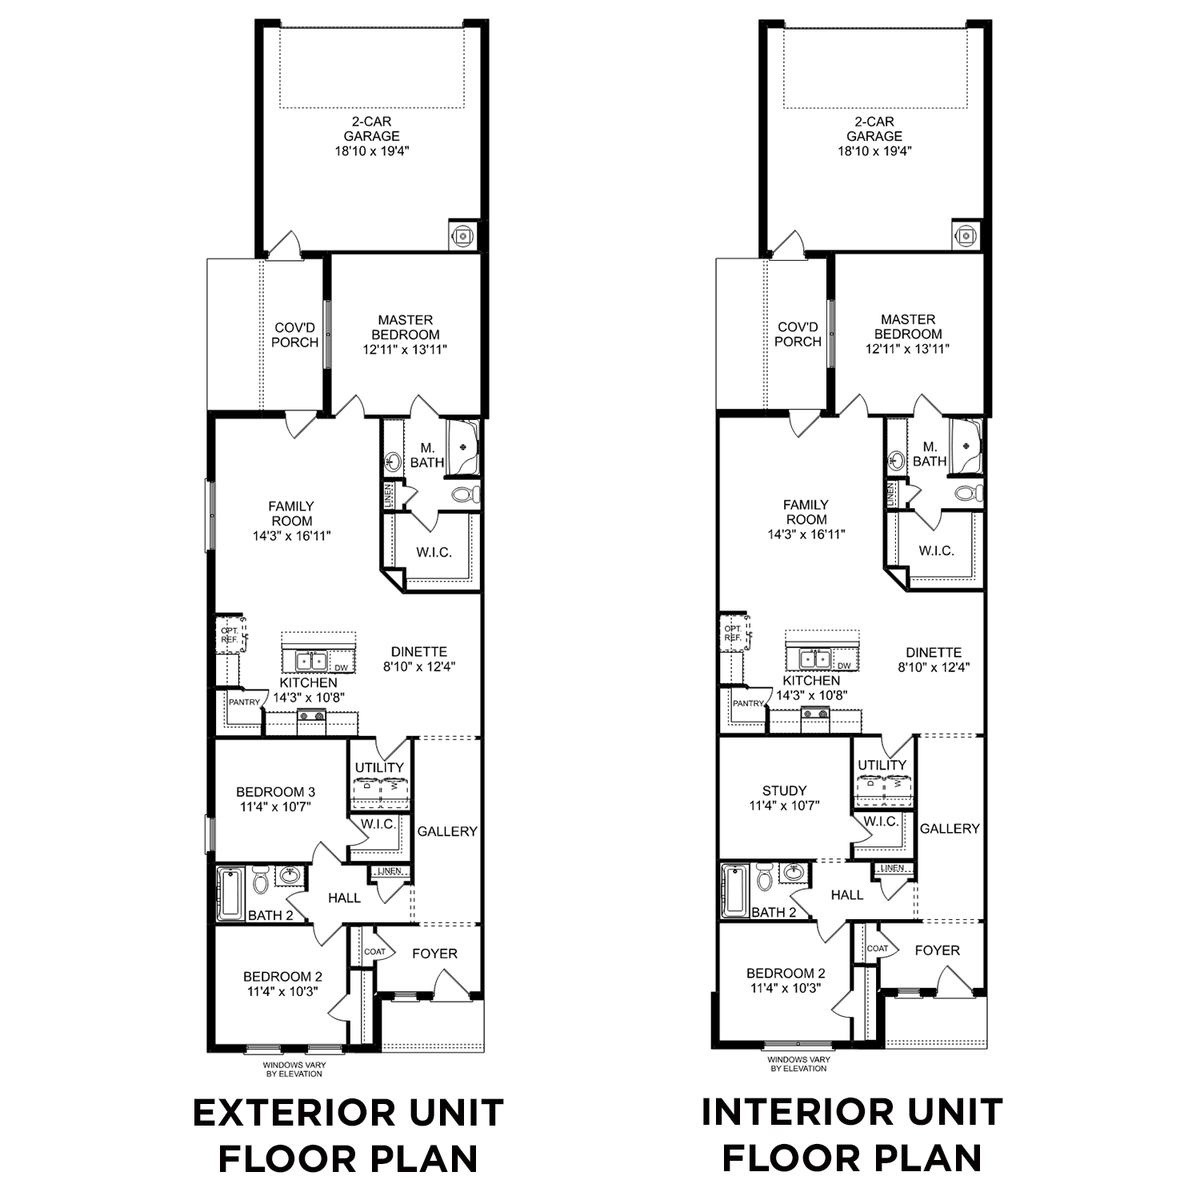 1 - The Camilla C floor plan layout for 433 Ronnie Drive in Davidson Homes' Cain Park community.